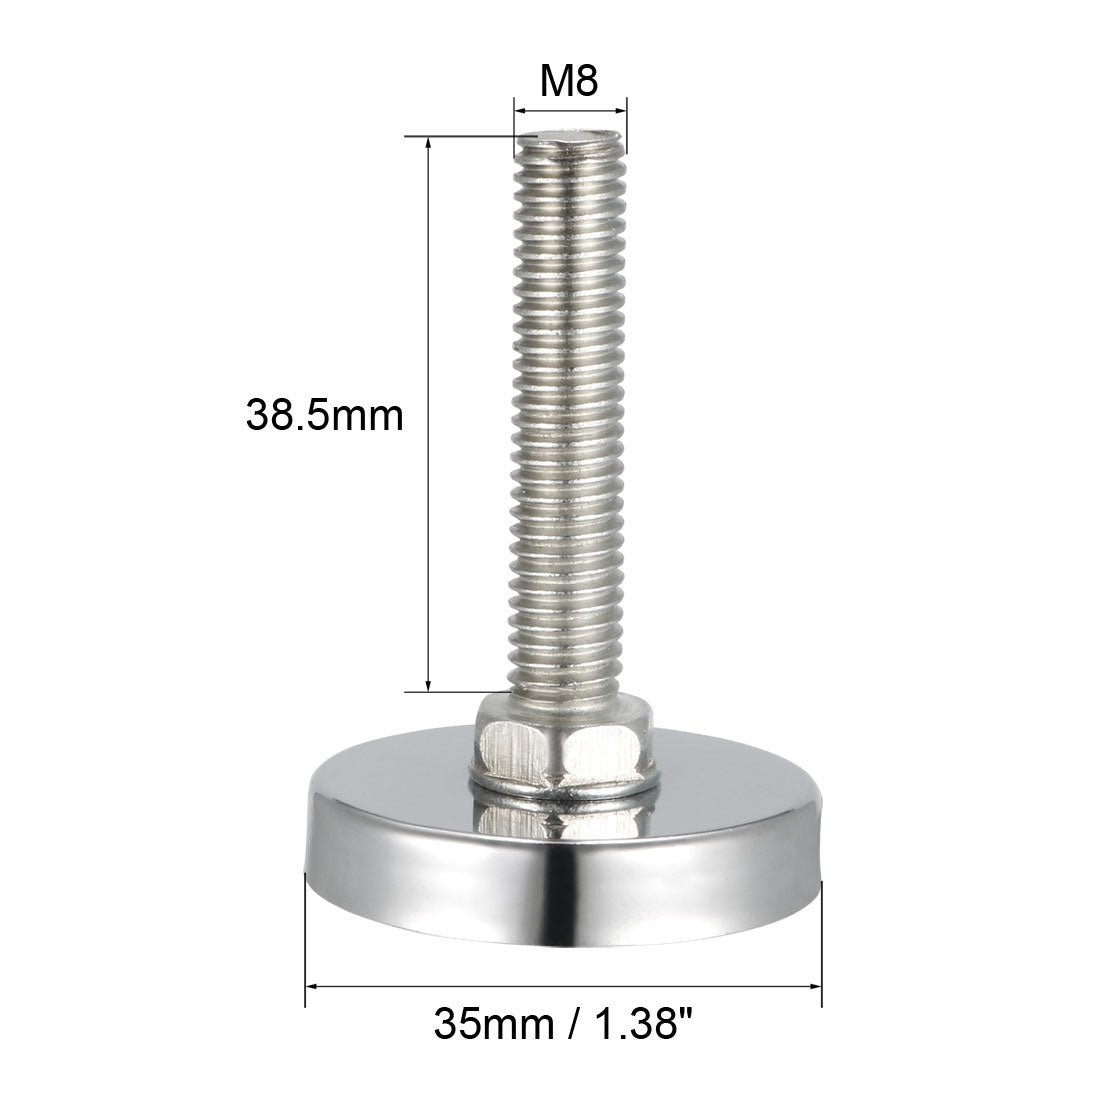 uxcell Uxcell Furniture Levelers, 16mm to 45mm Adjustable Height M8 x 38.5mm Threaded, 4Pcs